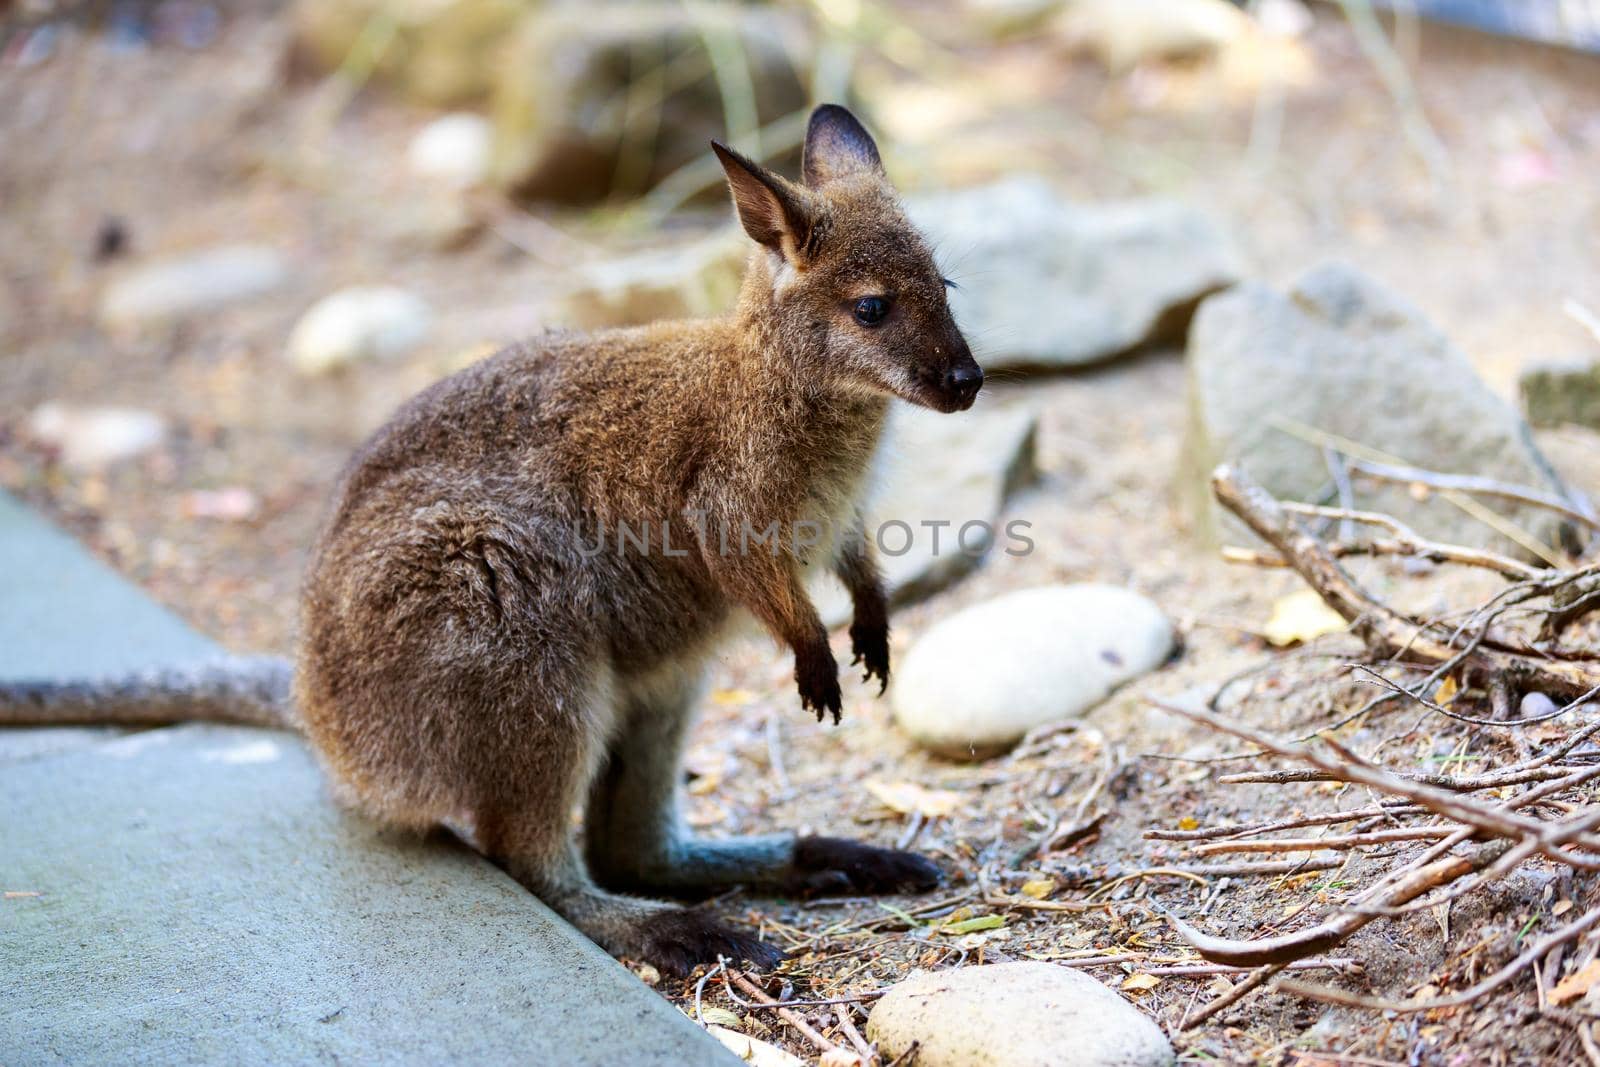 Bennett's Wallaby enjoys leisure time in captivity